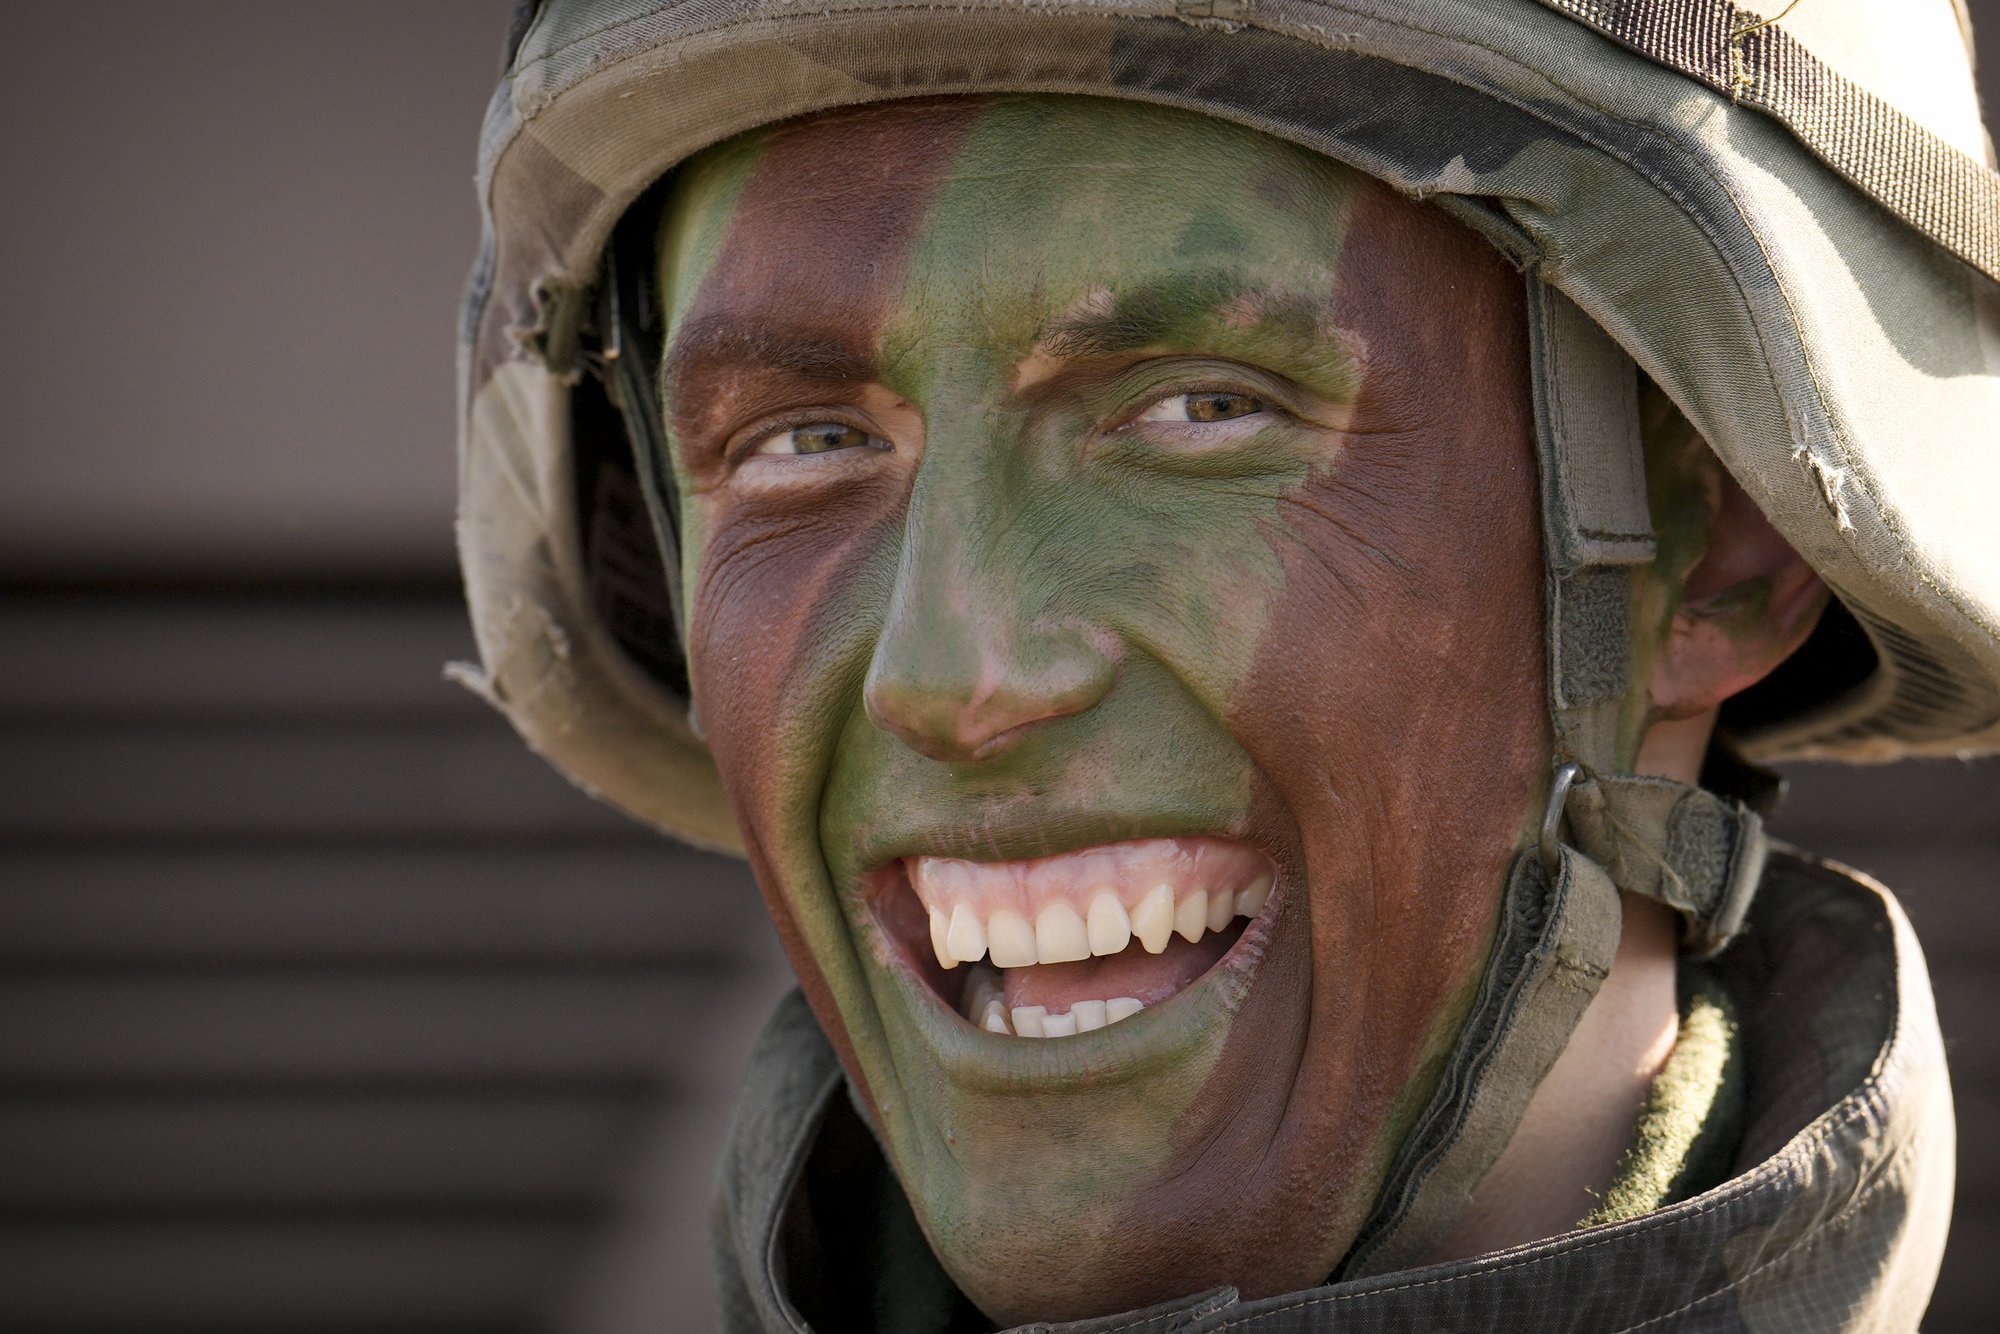 A French serviceman laughs during a joint French US exercise involving HIMARS and MLRP rocket launchers at a firing range in Capu Midia, on the Black Sea shore, Romania, Thursday, Feb. 9, 2023. U.S. and French troops that are part of a NATO battlegroup in Romania held a military exercise on Thursday to test the 30-nation alliance's eastern flank defenses, as Russia's full-scale invasion of neighboring Ukraine nears its one-year anniversary. (AP Photo/Vadim Ghirda)